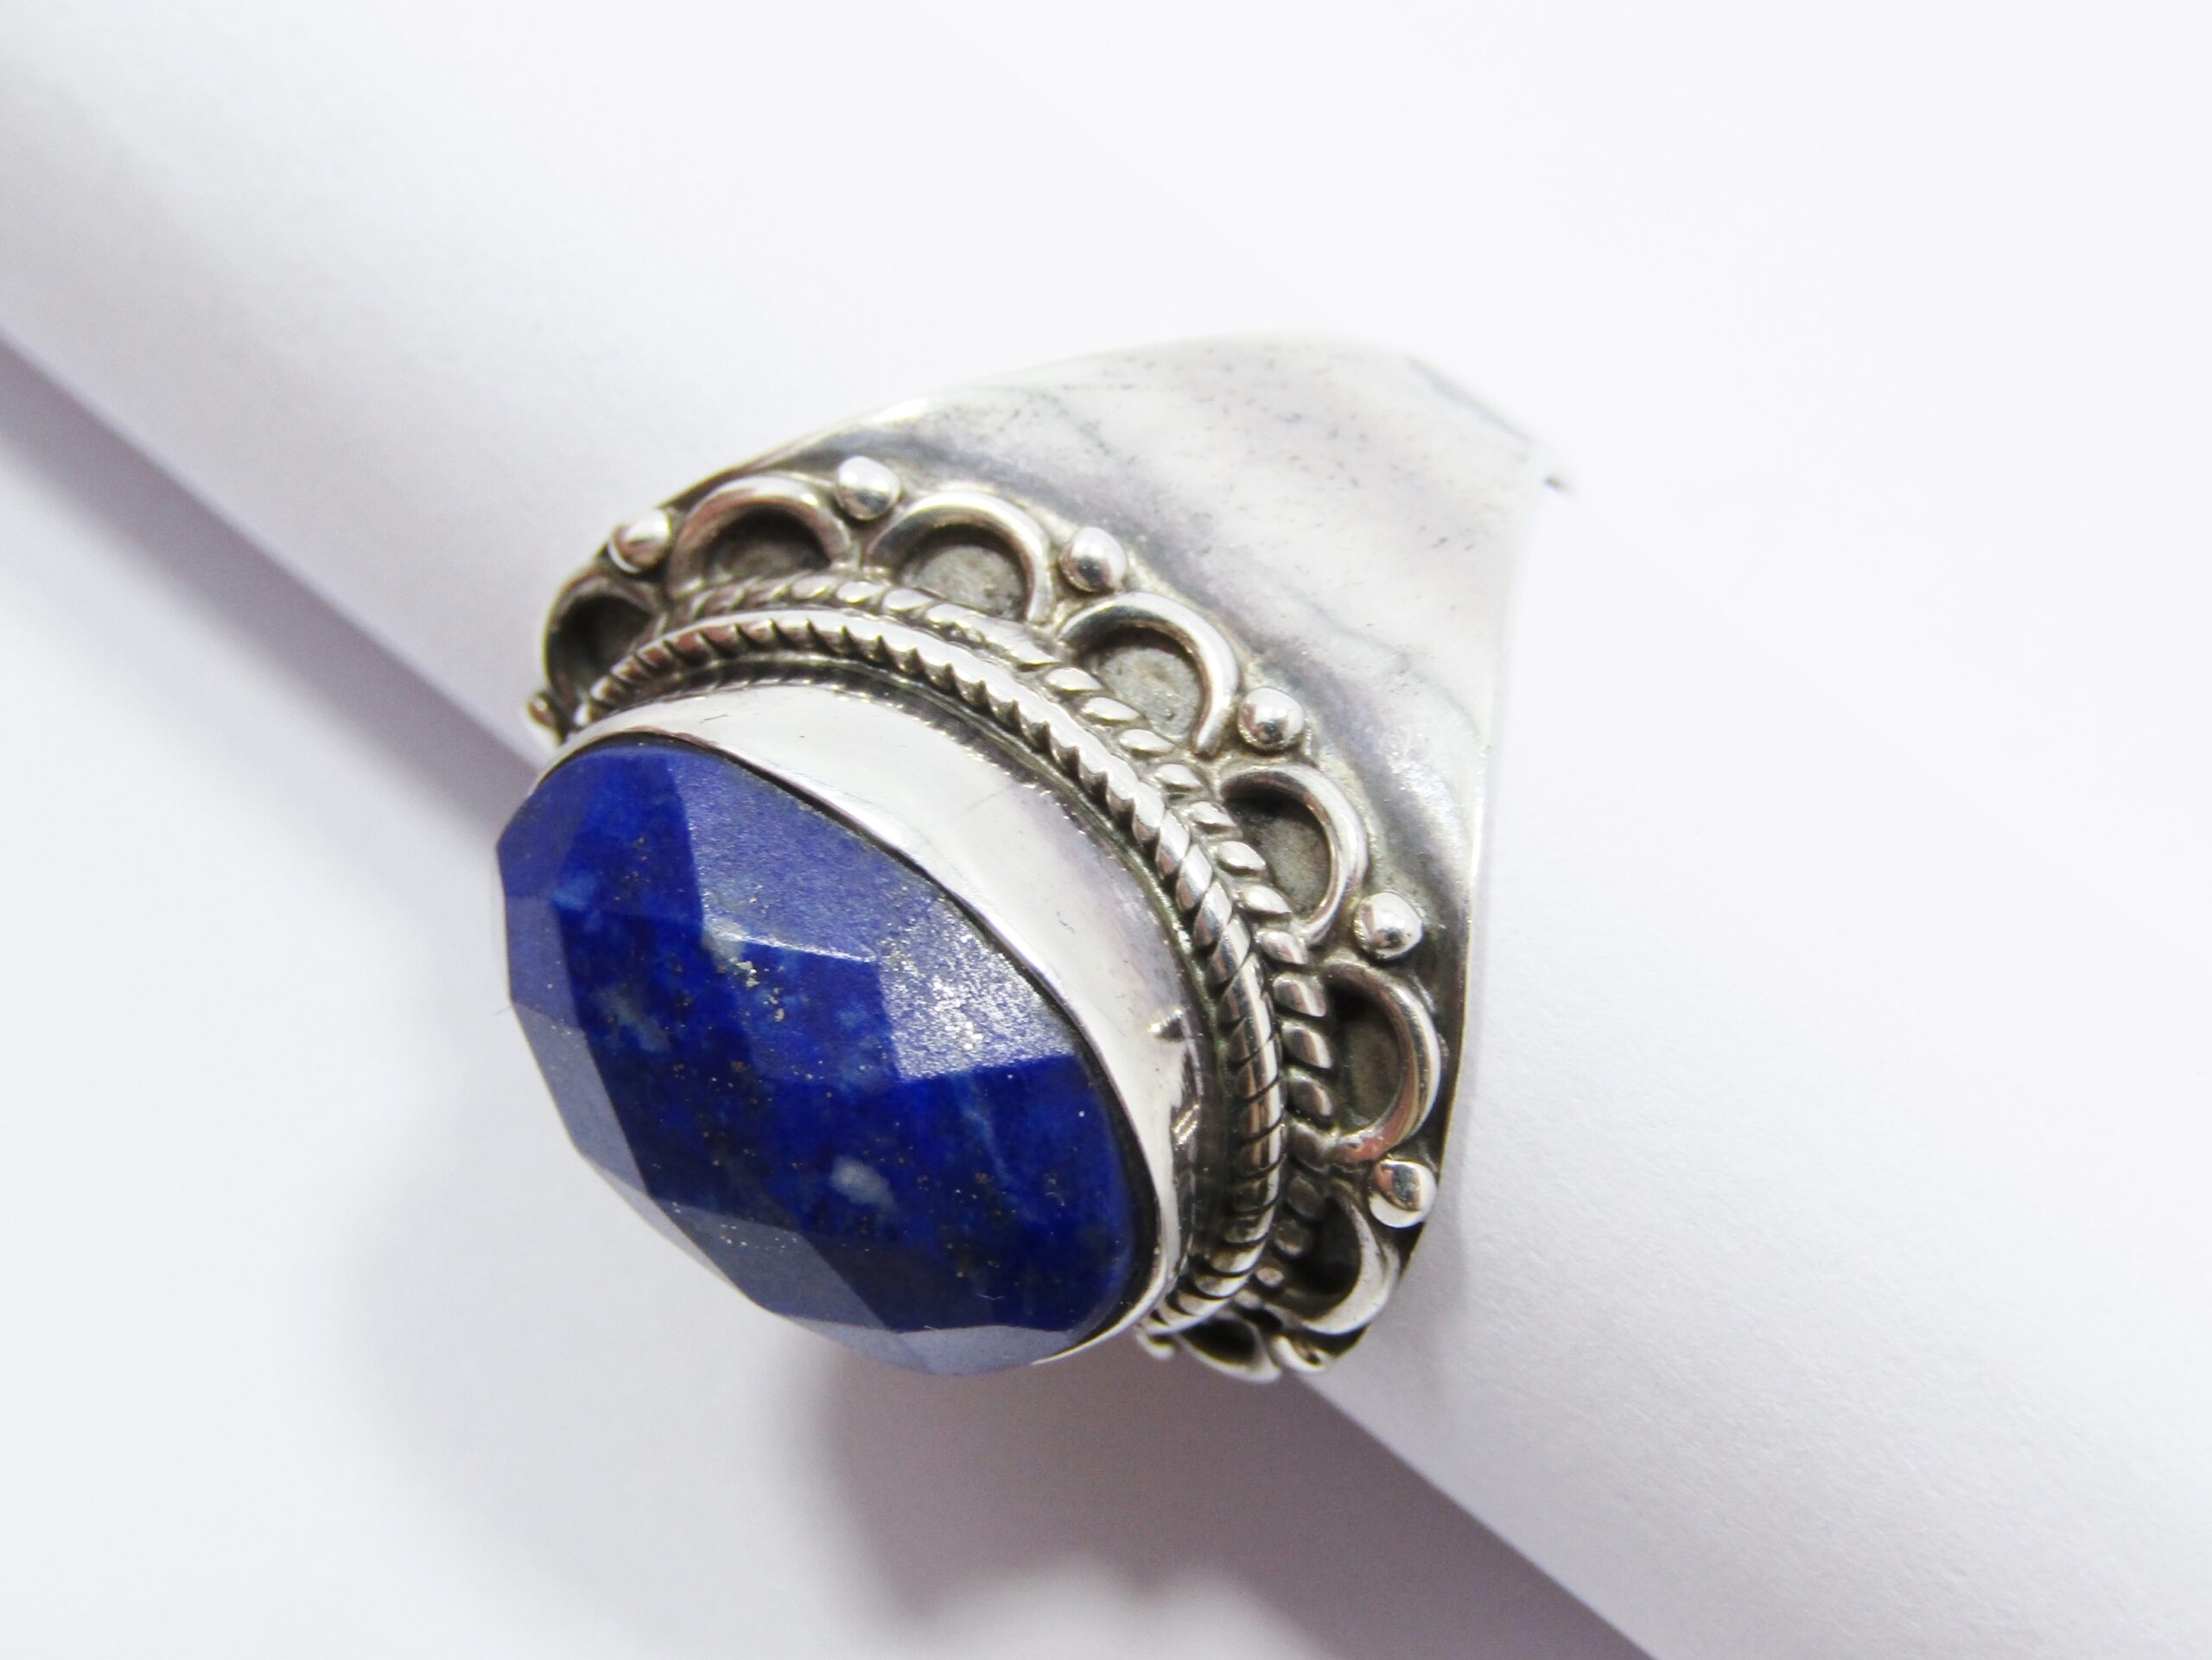 A Gorgeous Lapis Lazuli Boho Design Ring in Sterling Silver.